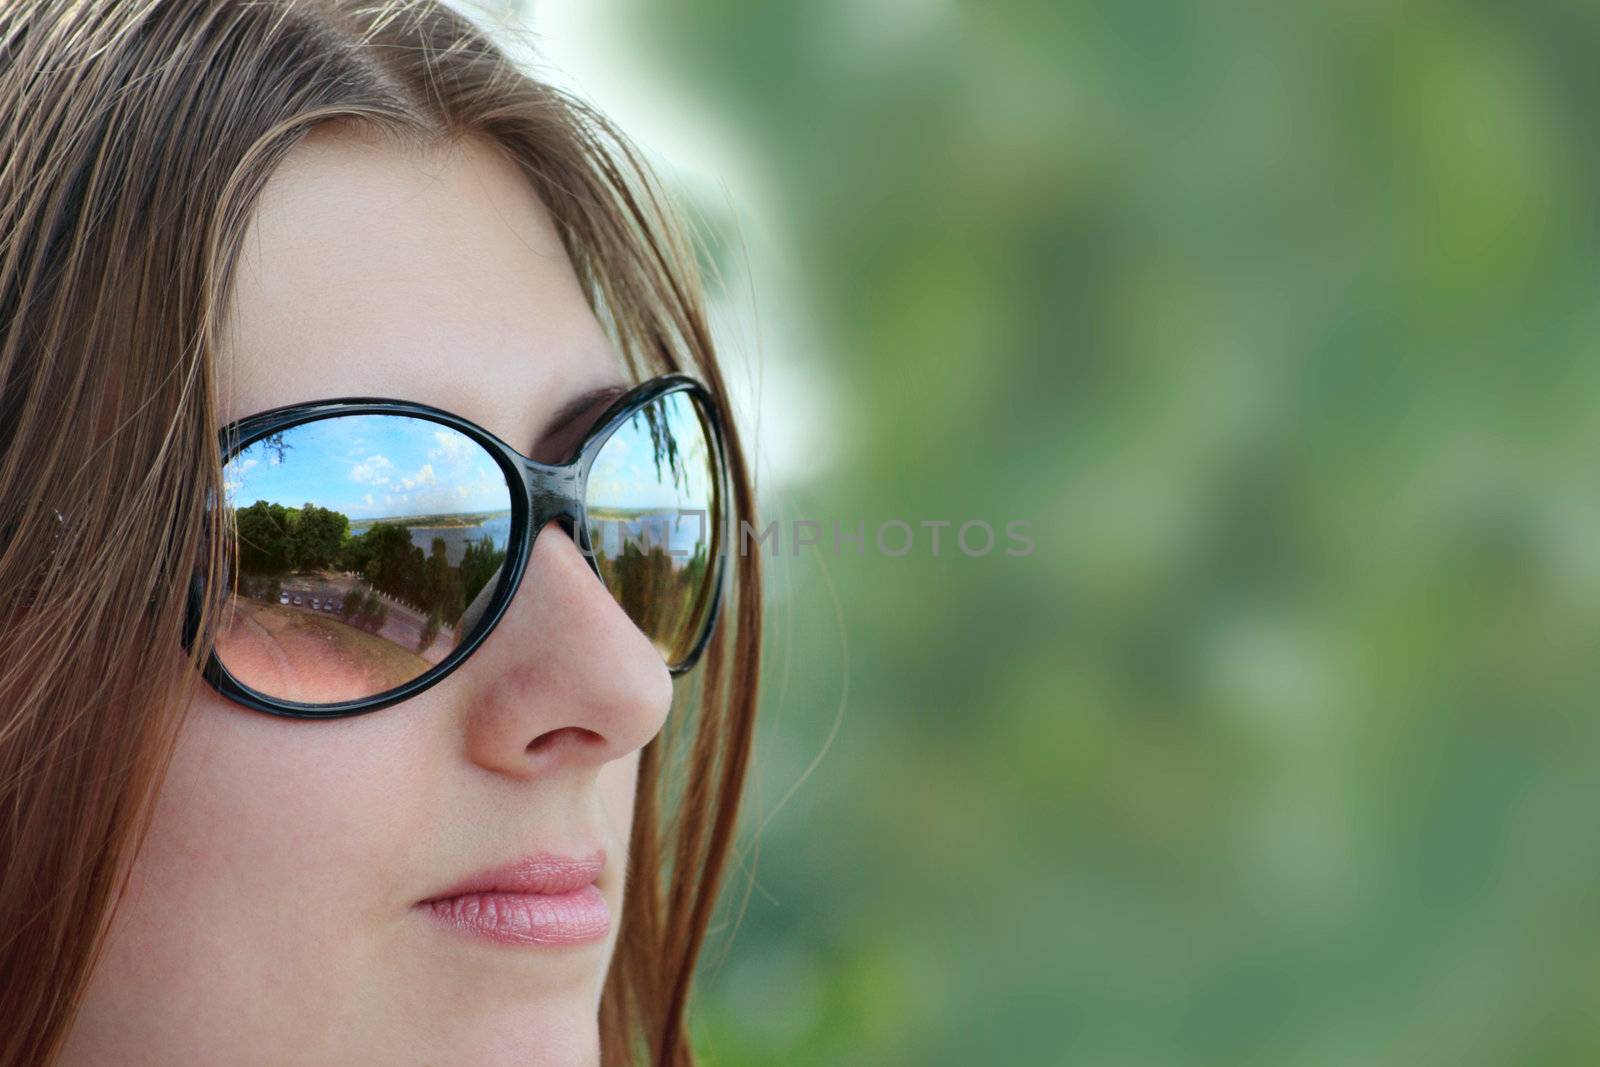 The nice girl in sun glasses removed close up